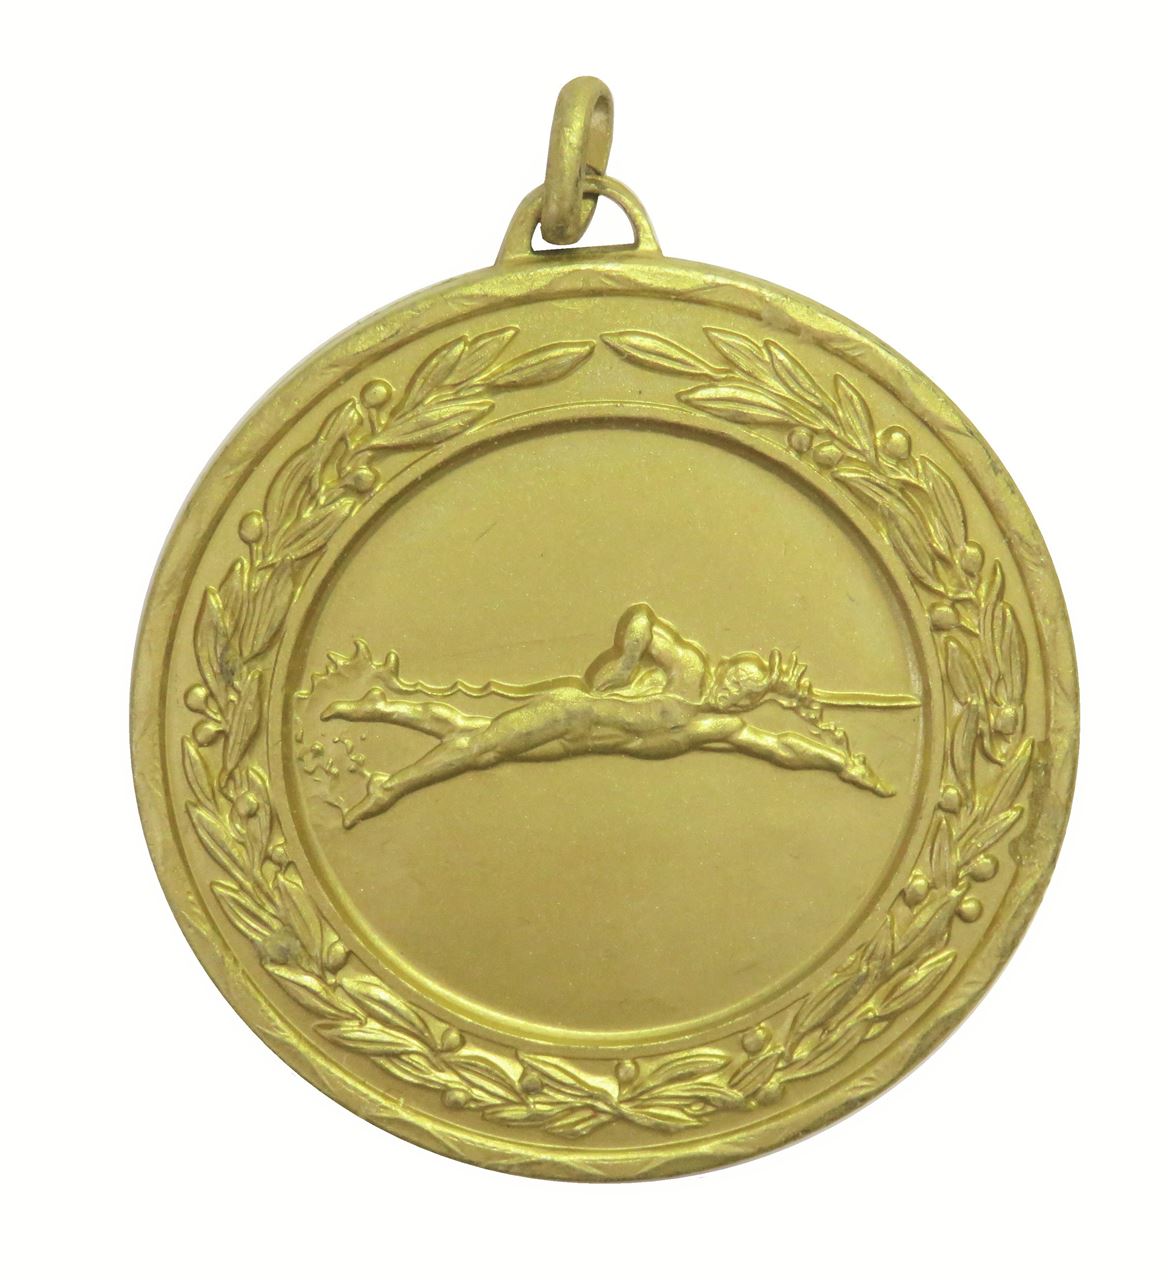 Gold Laurel Economy Male Swimming Medal (size: 50mm) - 4230E